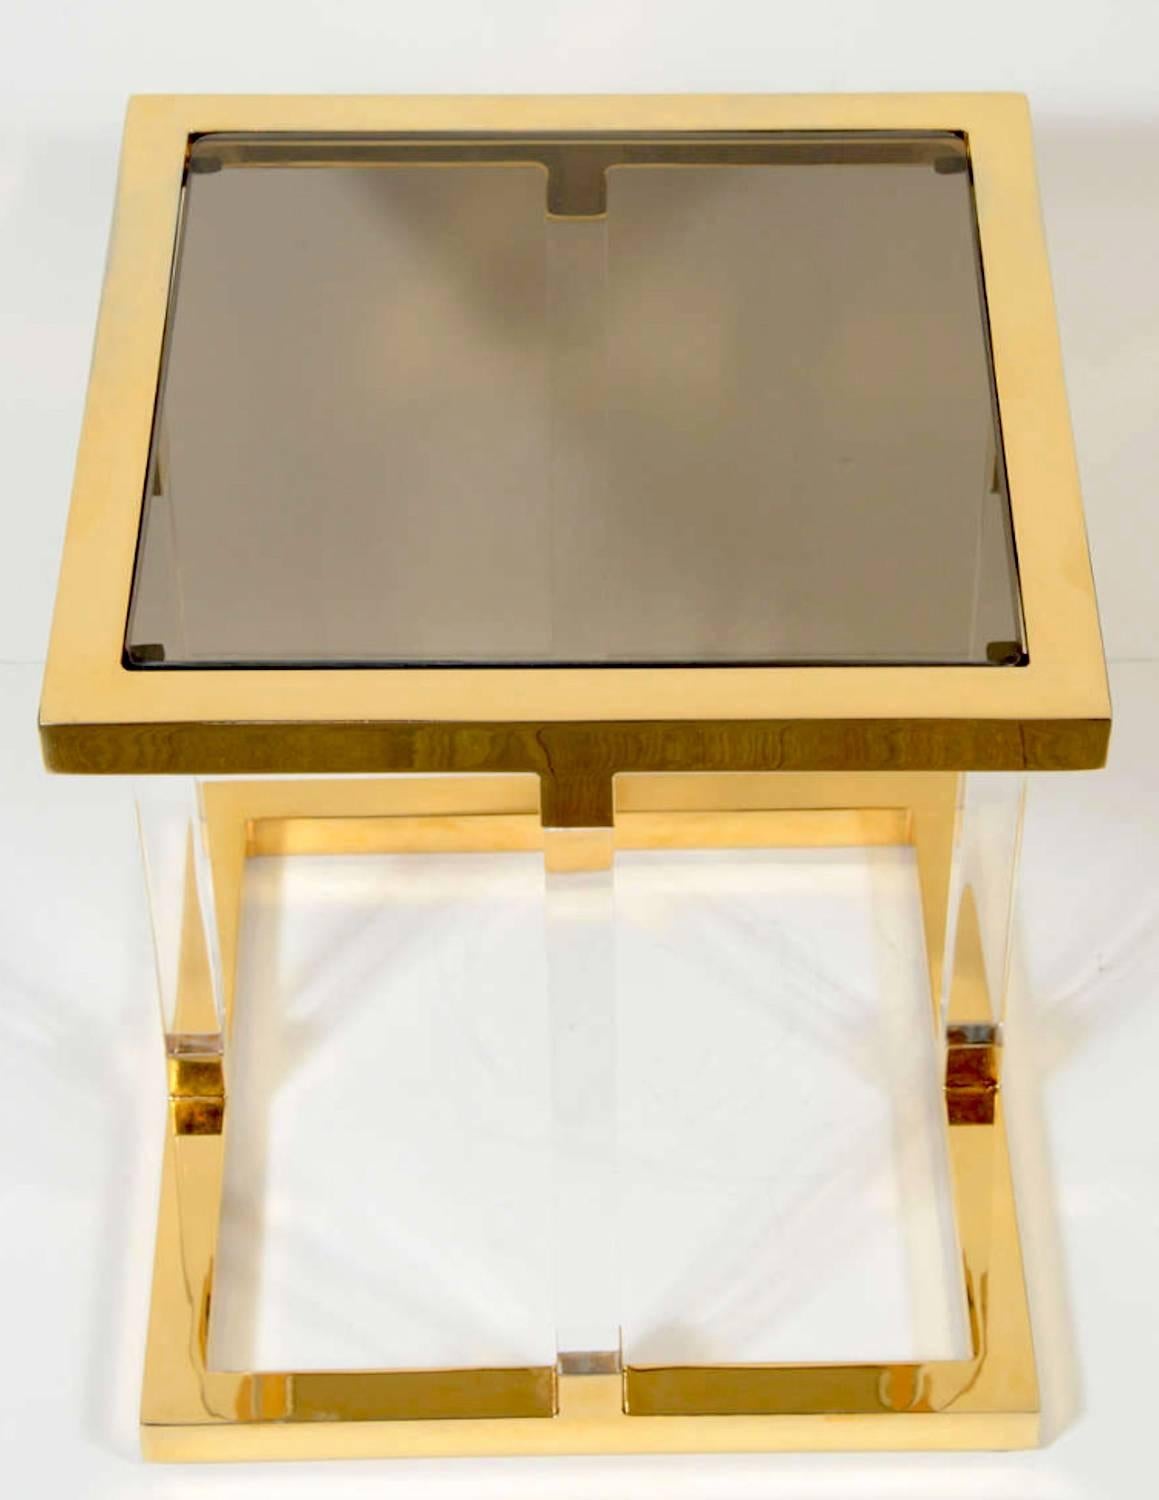 Pair of 1970s Charles Hollis Jones metric line side table. Polished brass frame with Lucite supports and a grey smoked glass top.